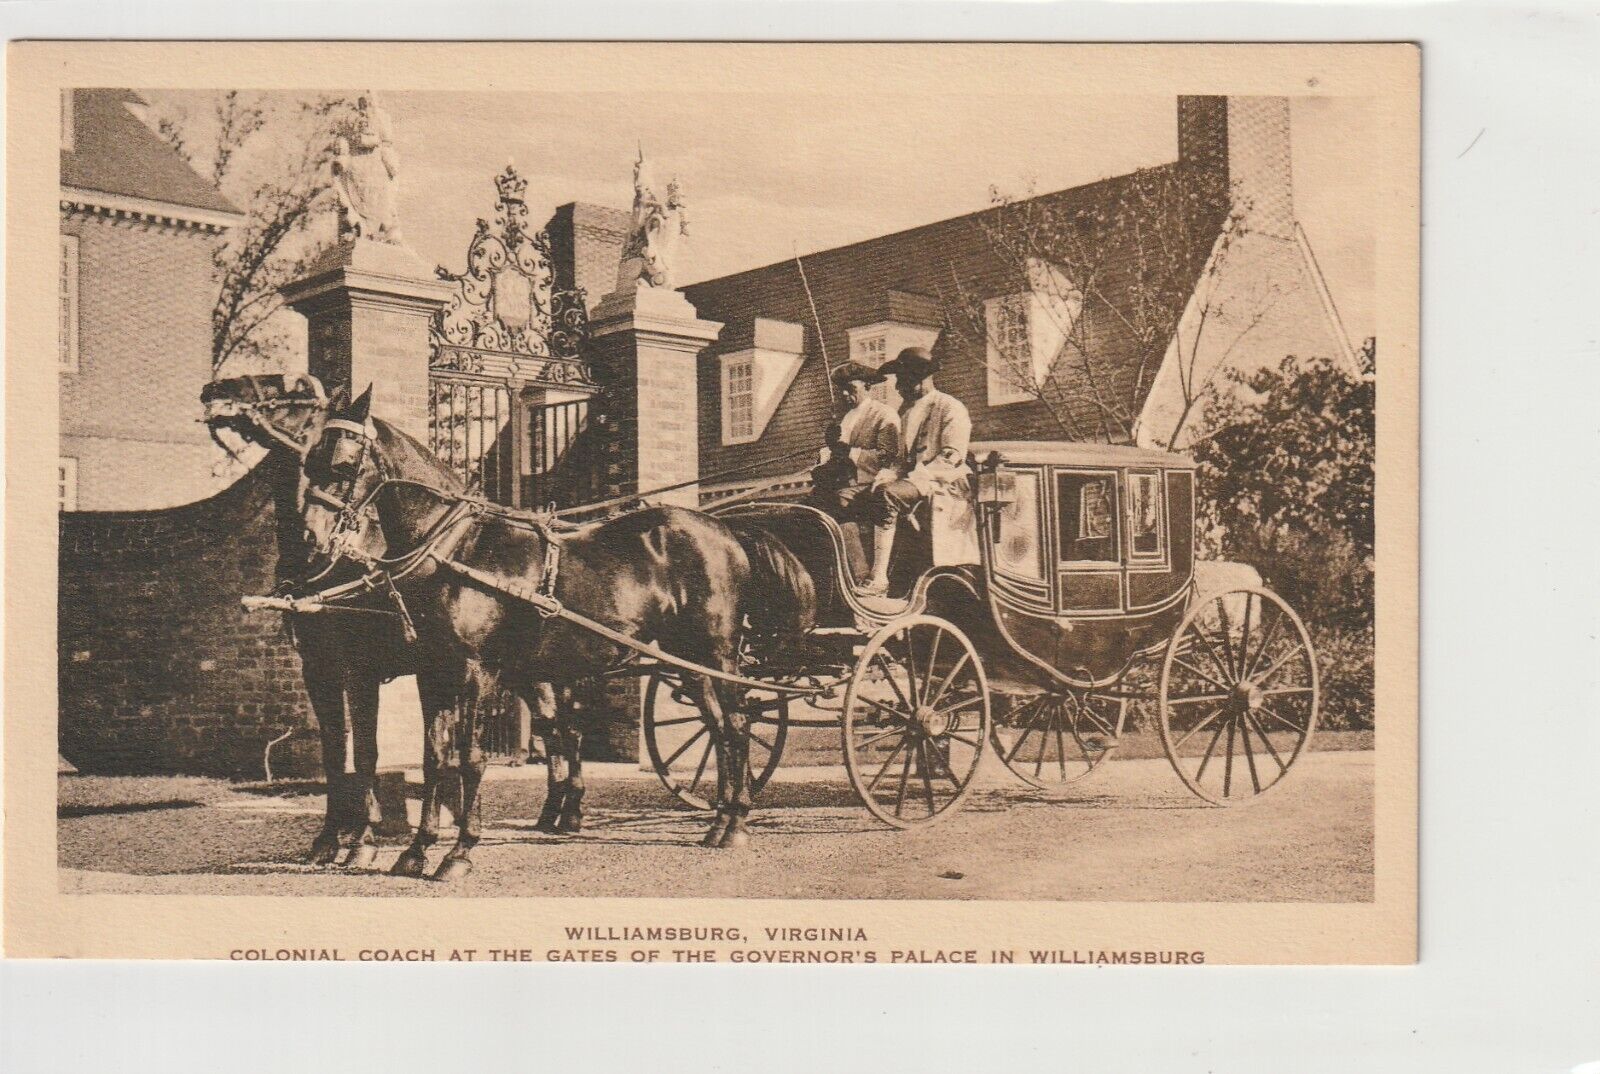 Vintage Postcard Williamsburg Virginia Colonial Coach at the Governor's Palace